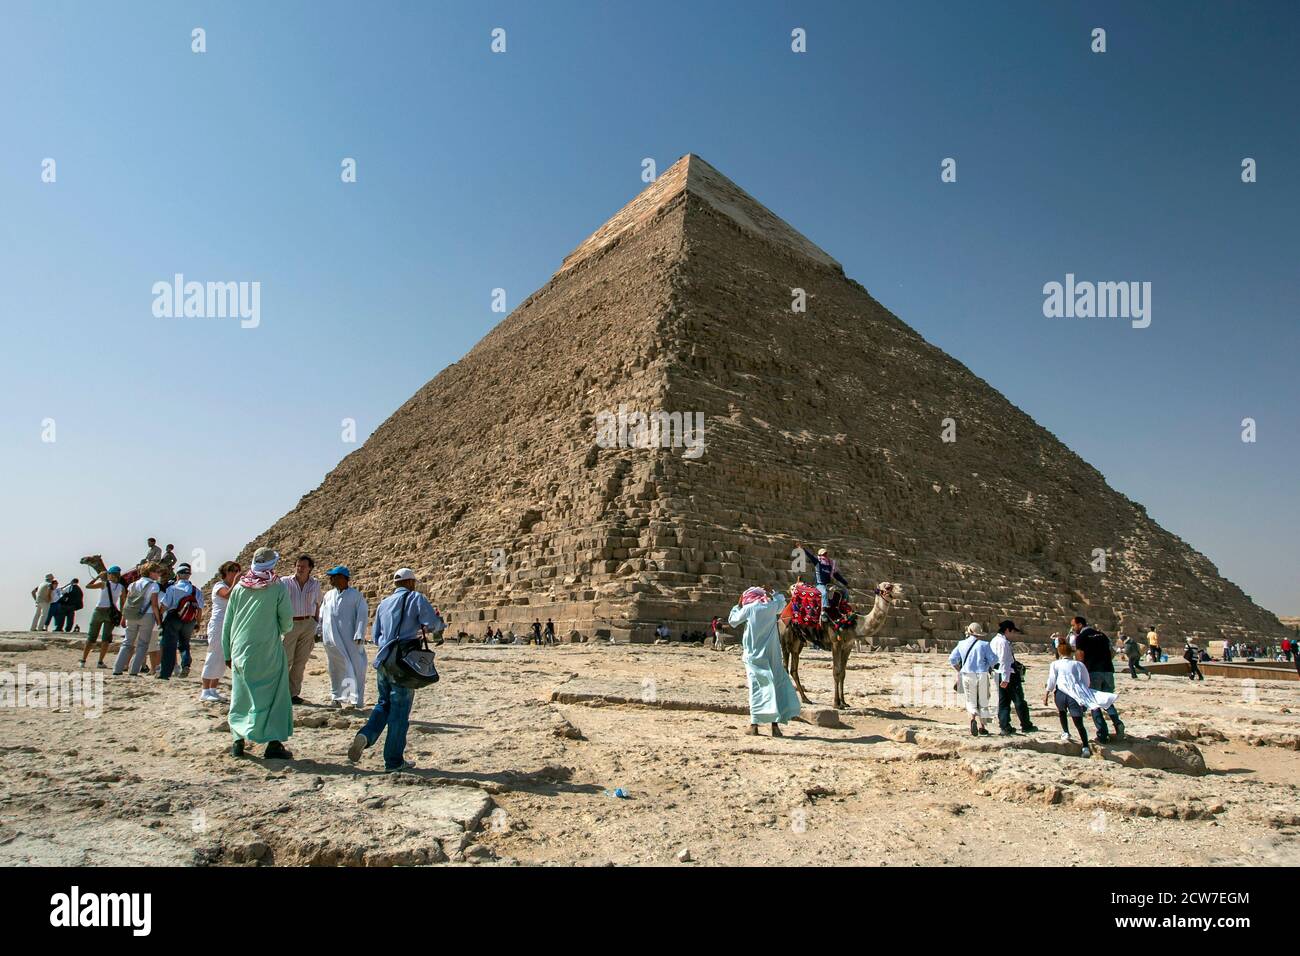 Visitors to the Giza plateau at Cairo in Egypt walk around the base of the Pyramid of Khafre. This pyramid still has a limestone cap at its peak. Stock Photo